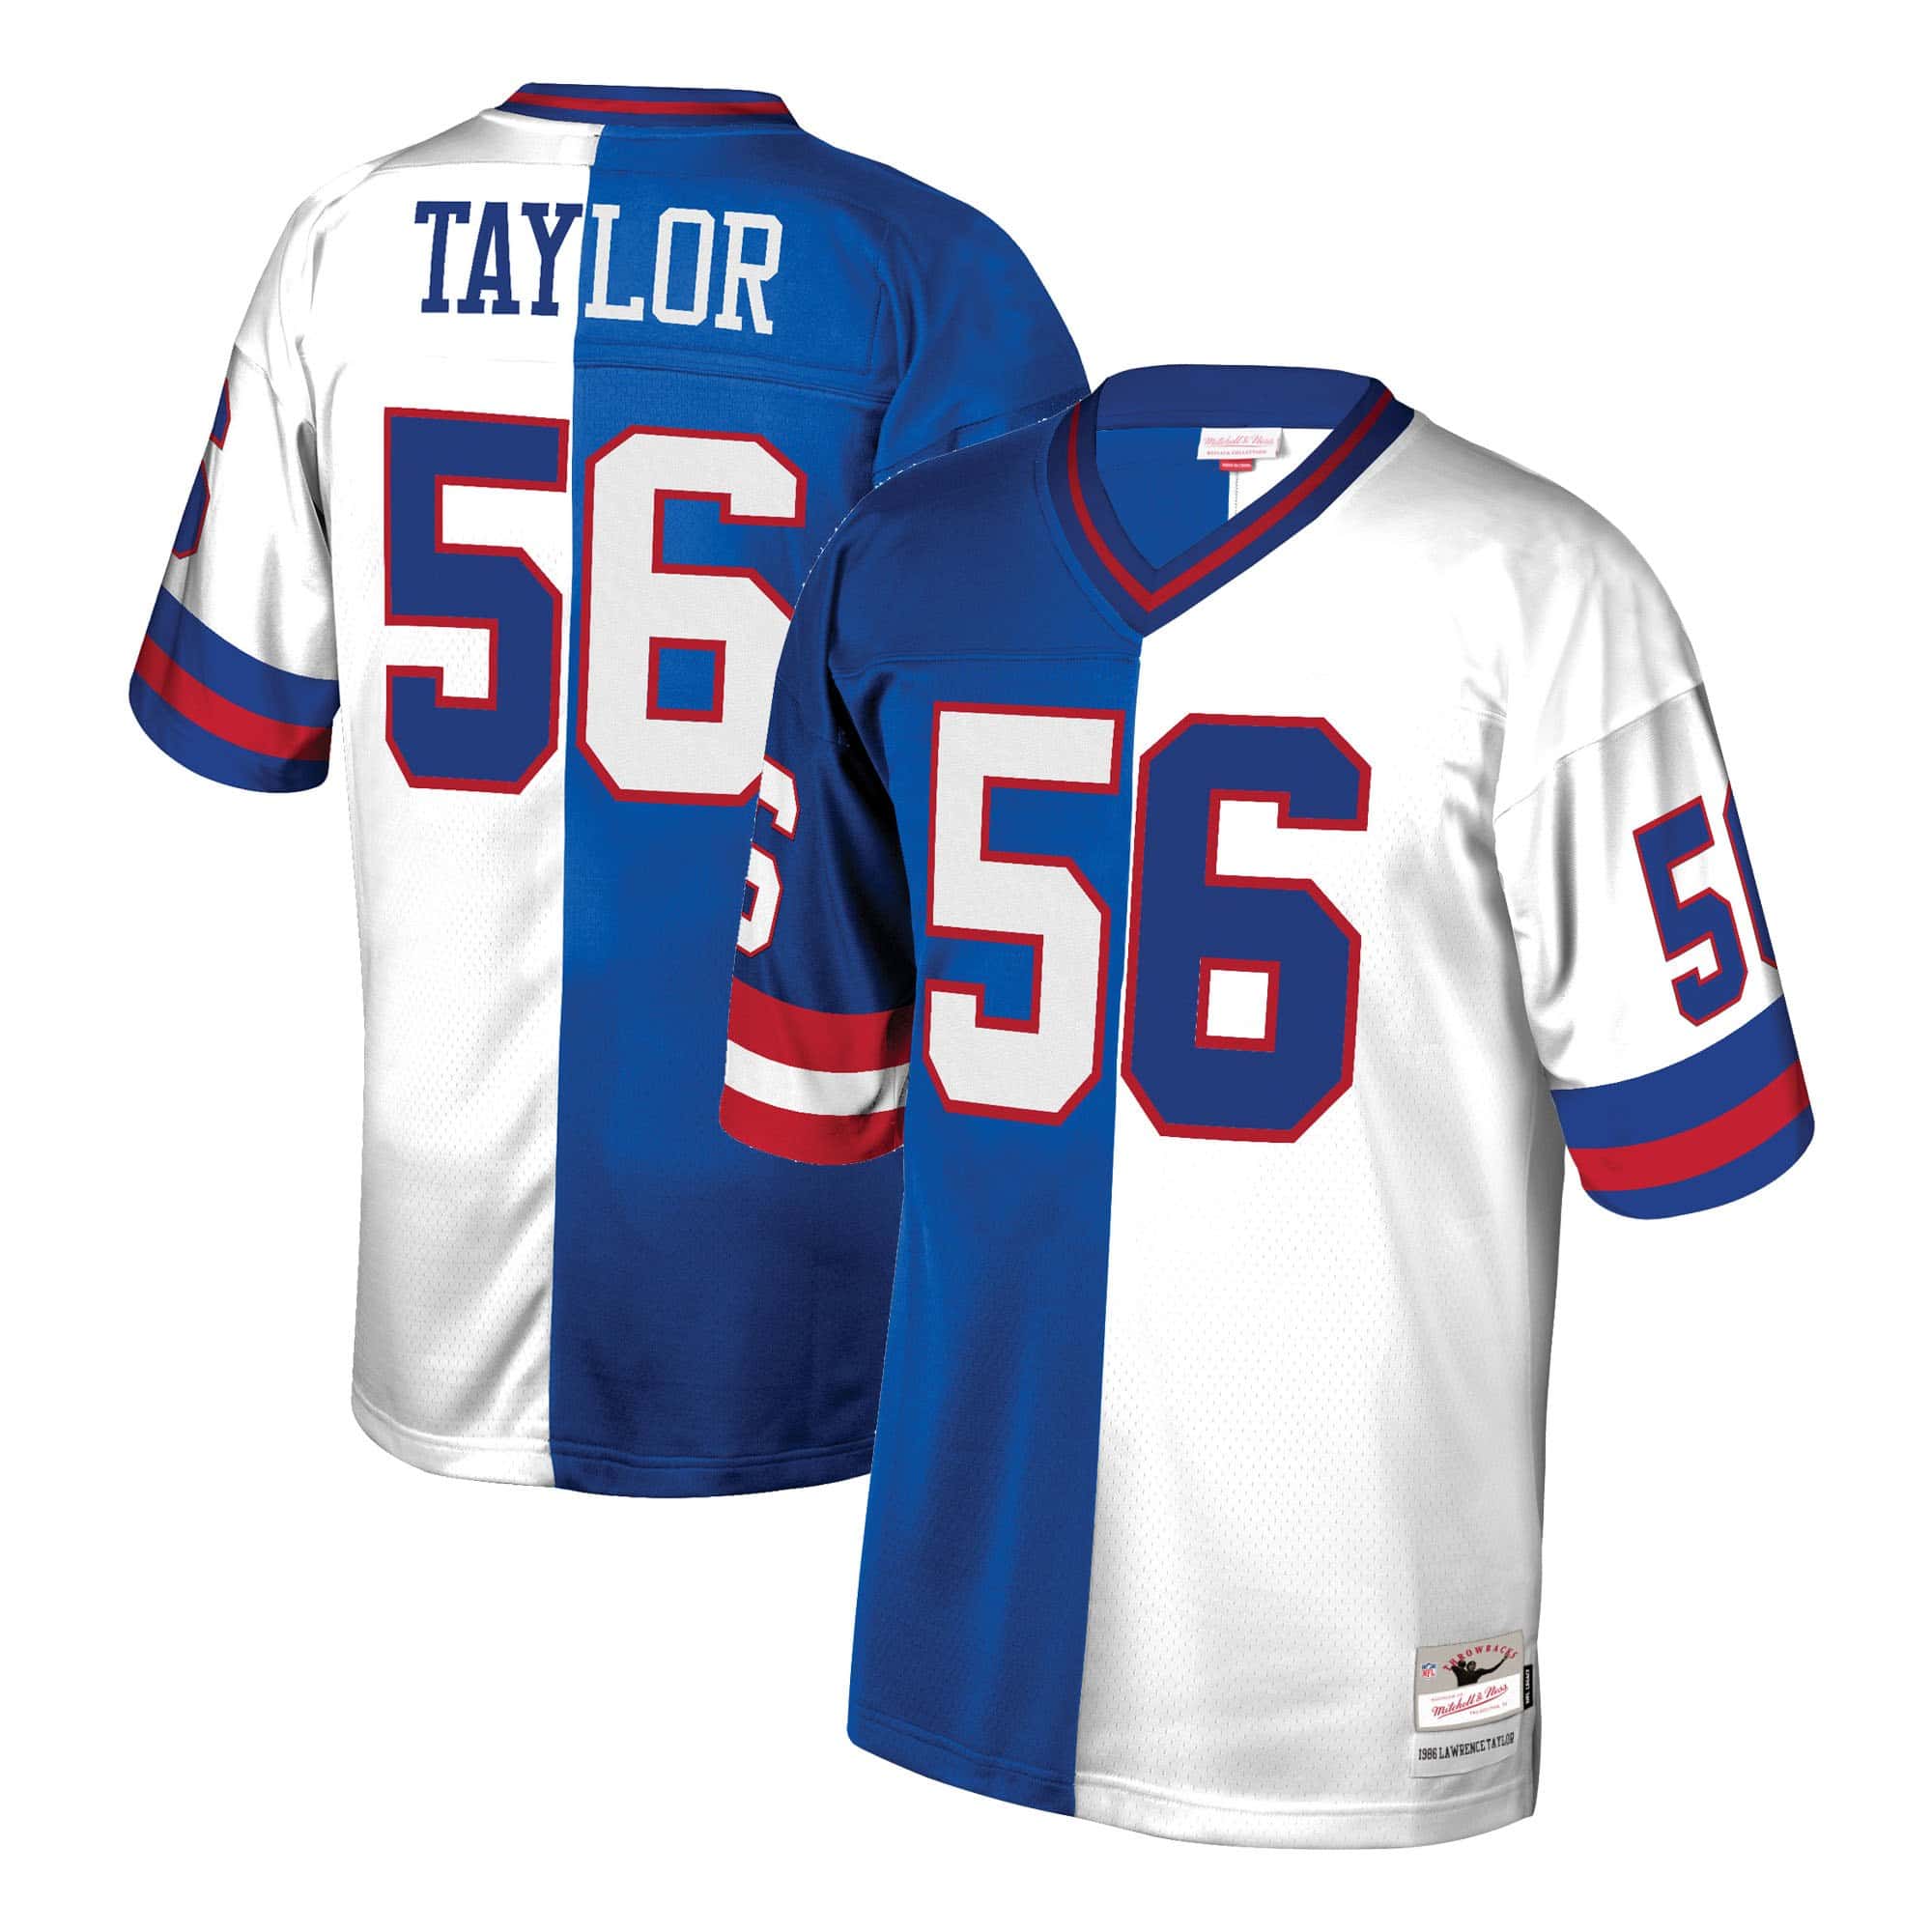 New York Giants bring back Lawrence Taylor to unveil throwback jersey